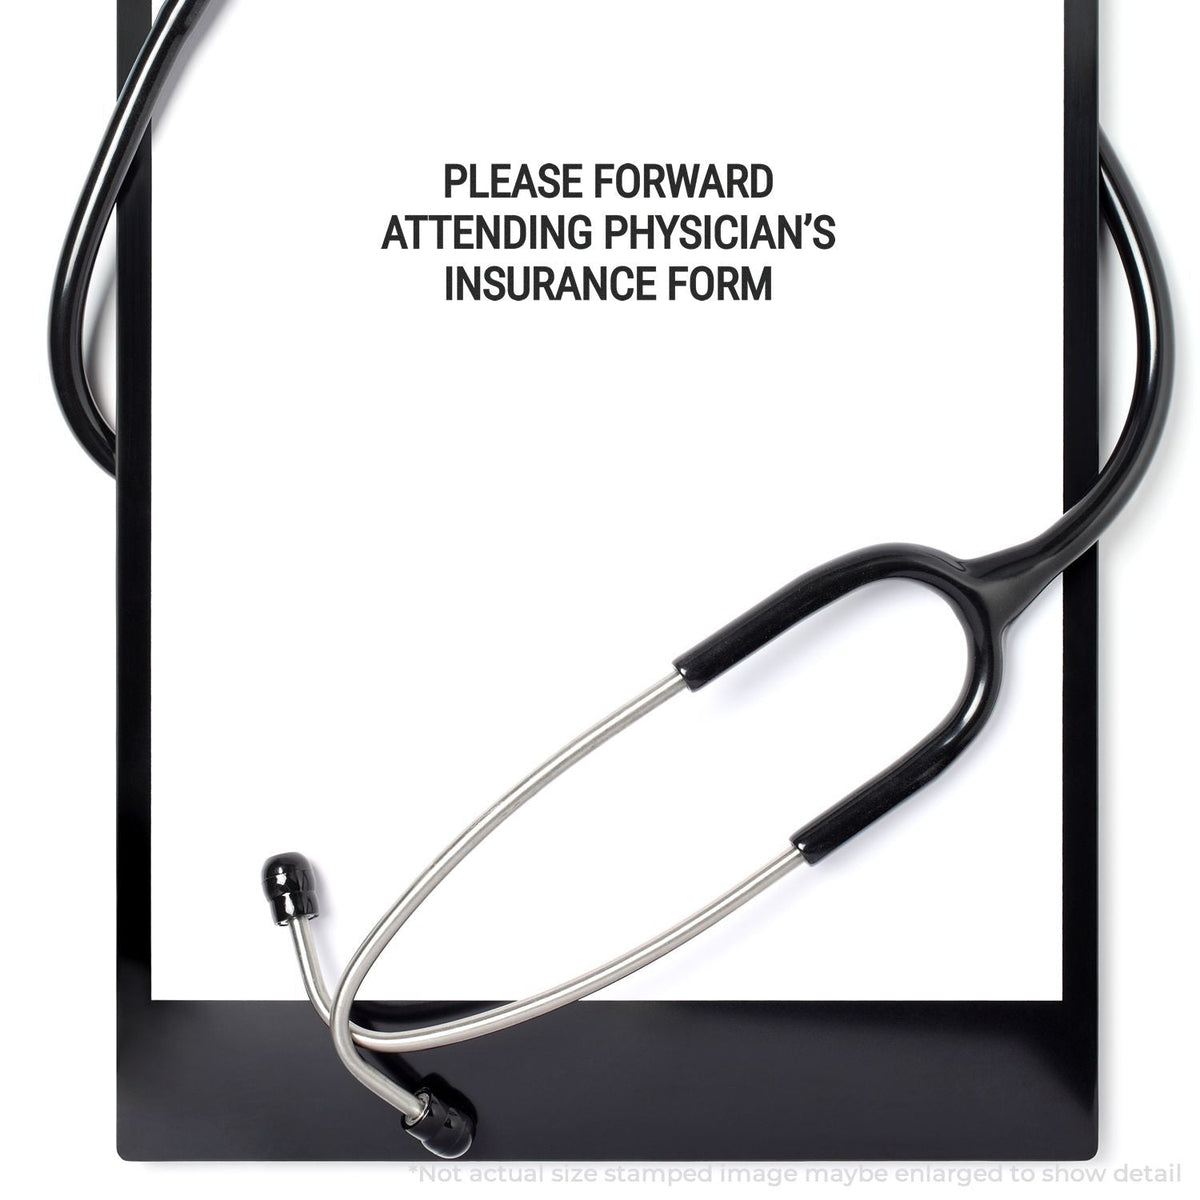 In Use Self-Inking Please Forward Attending Physicians Stamp Image